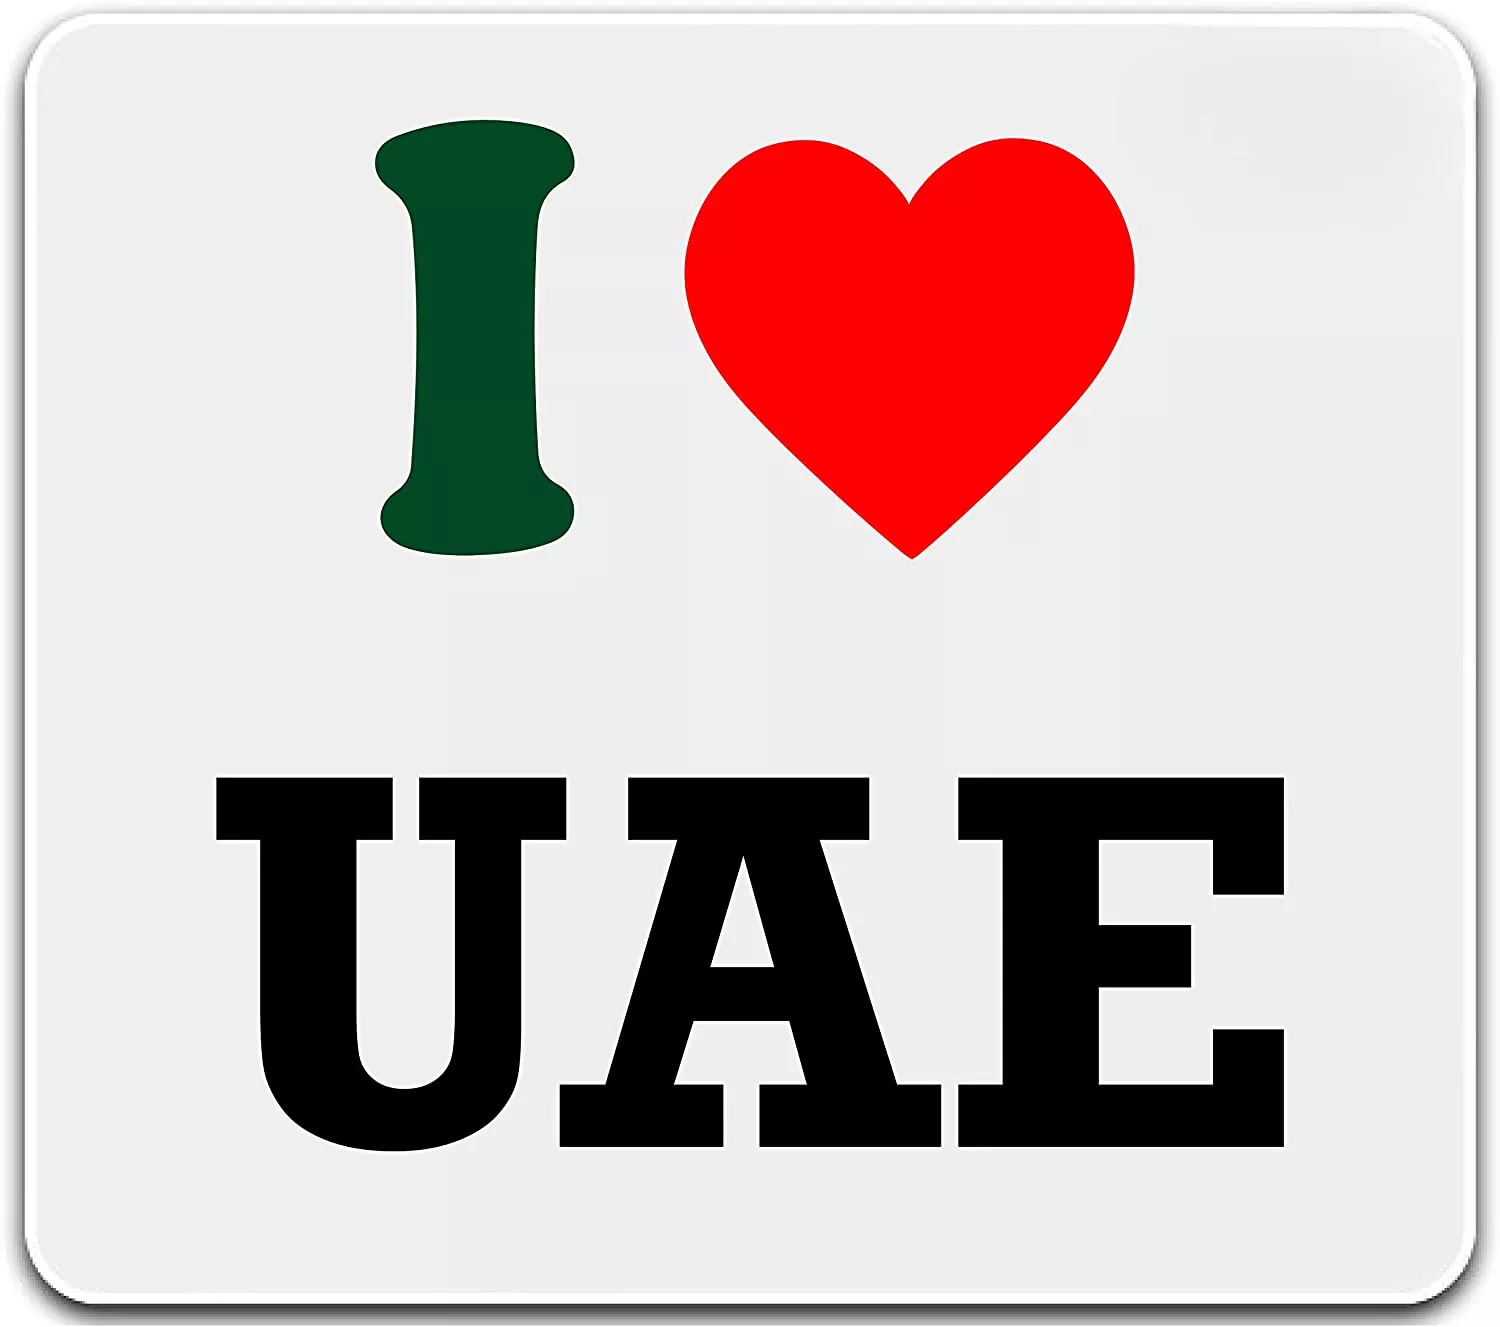 UAE NATIONAL DAY MOUSE PAD (Design 4)